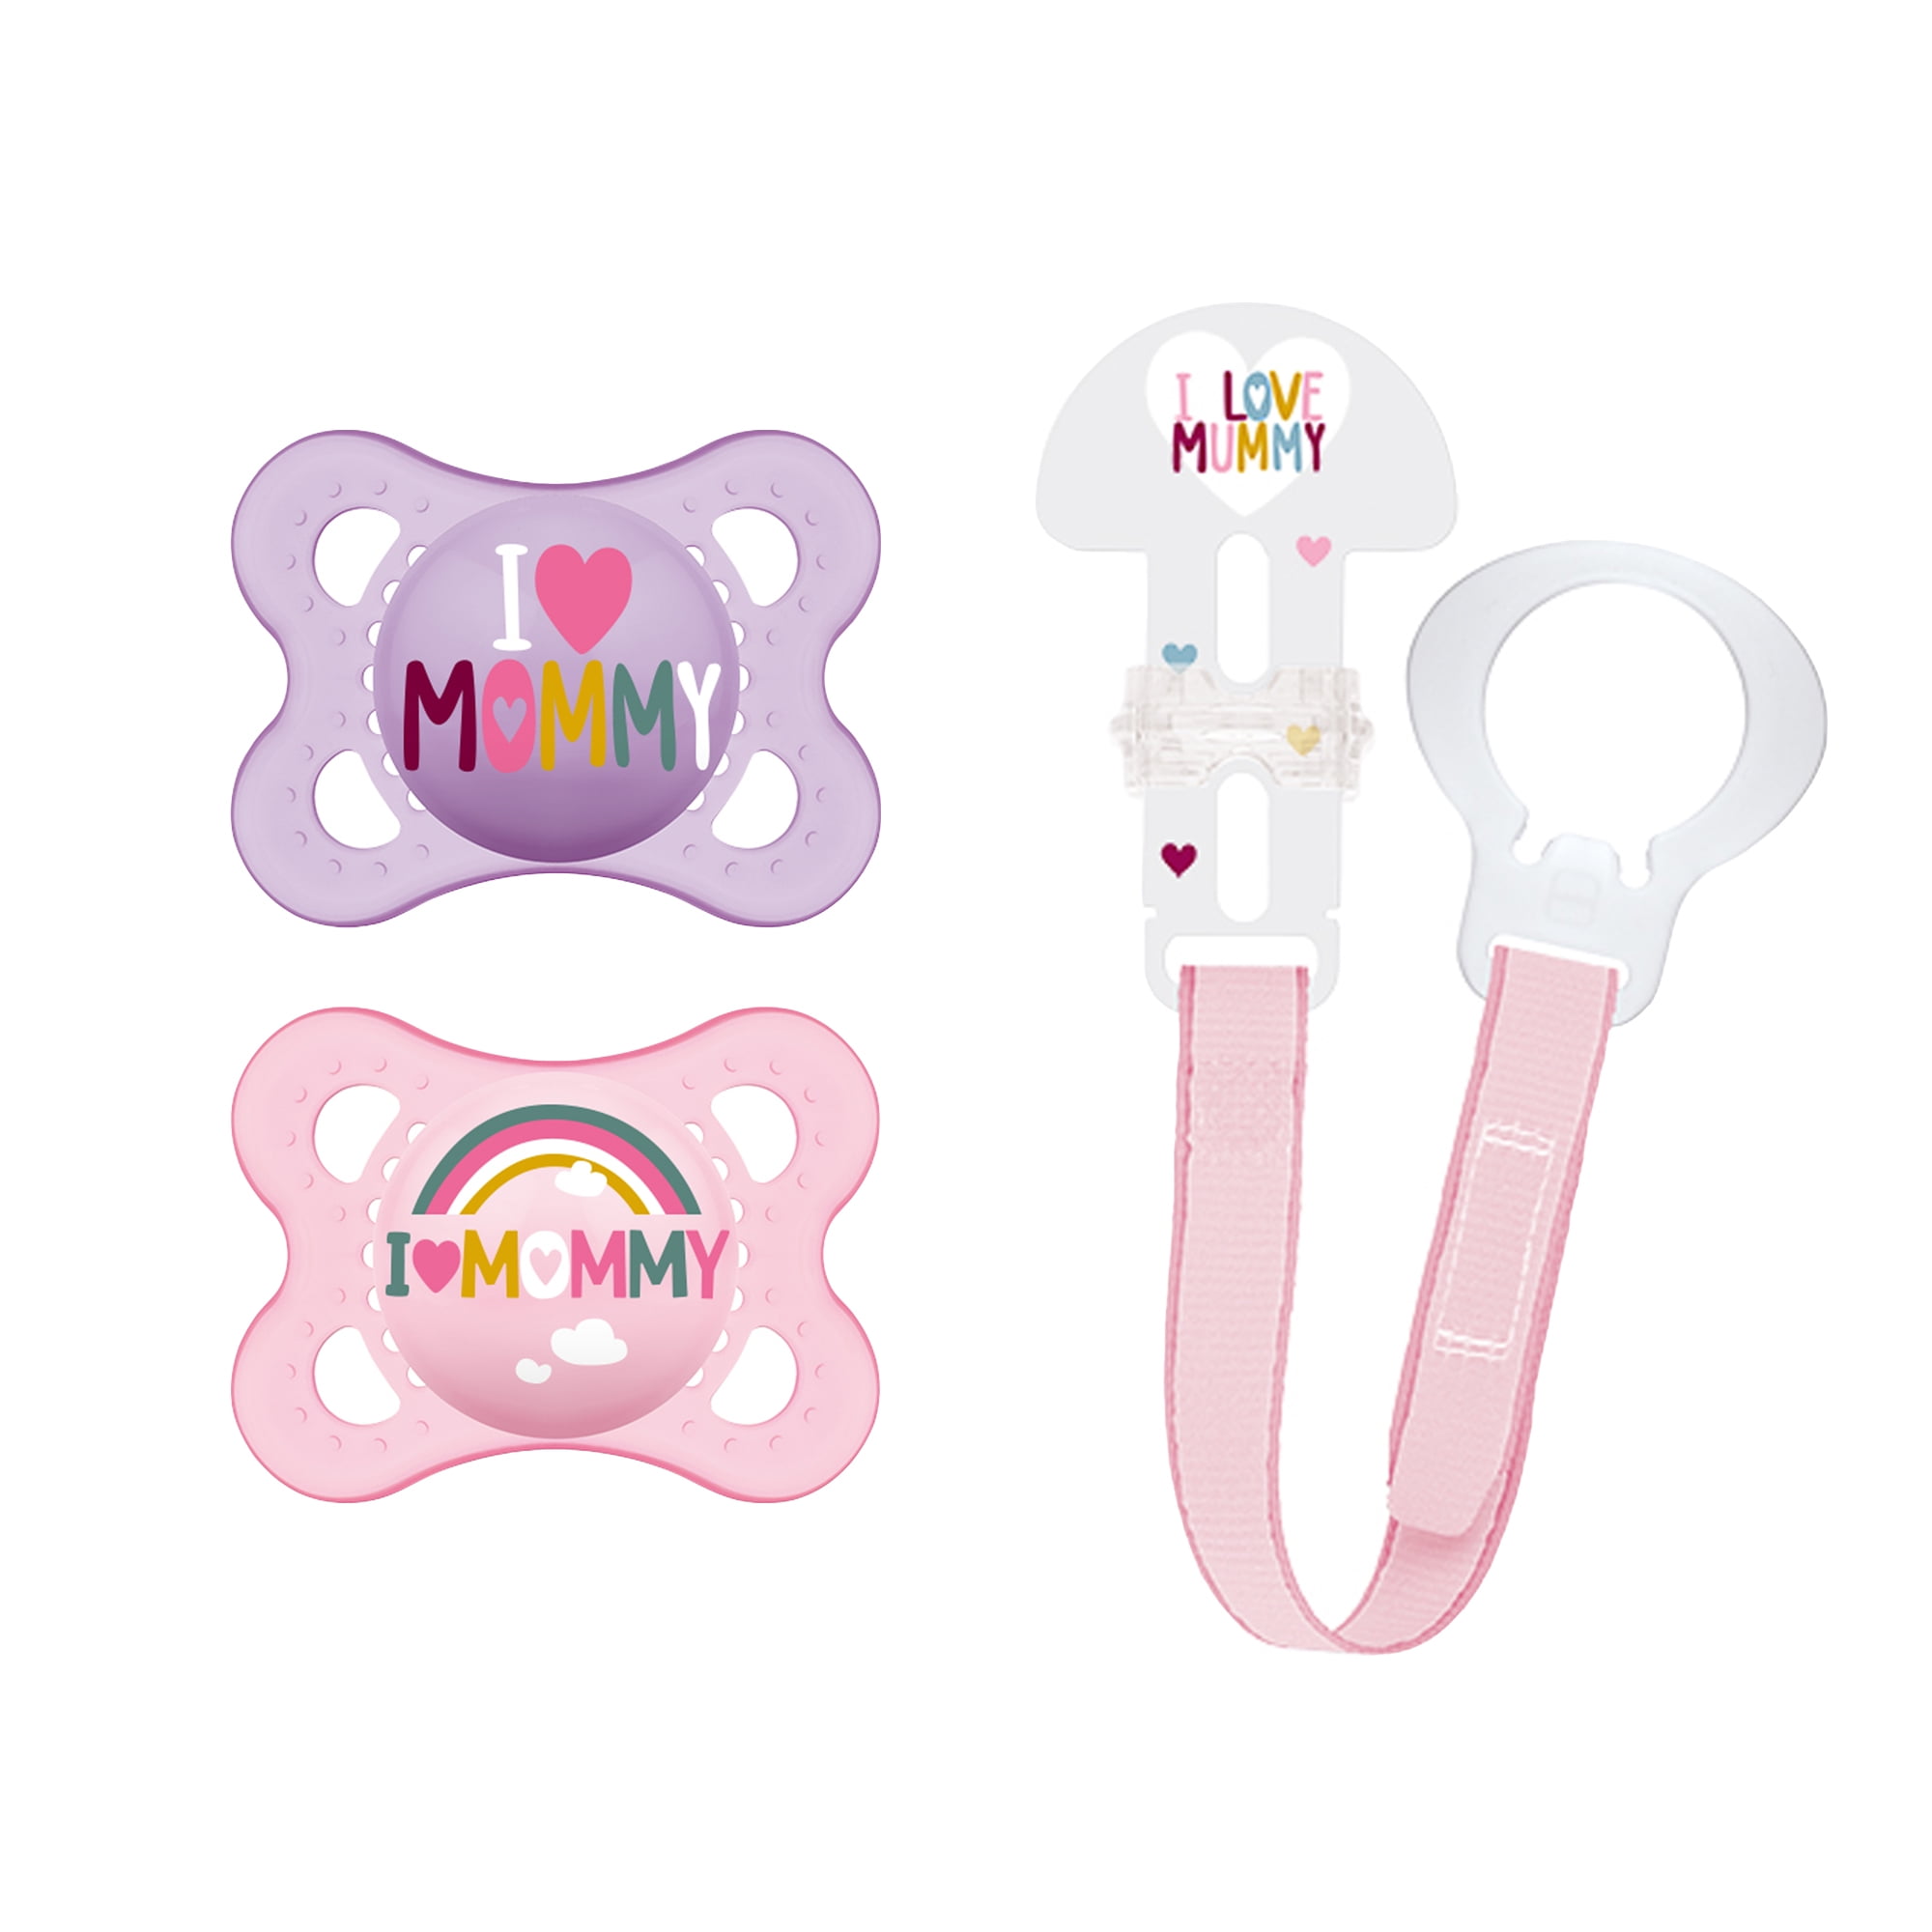 MAM I Love Mommy Collection Pacifiers (2 pack, 1 Sterilizing Pacifier Case), MAM Pacifier 0-6 Months, Baby Girl Pacifier, Best Pacifier for Breastfed Babies